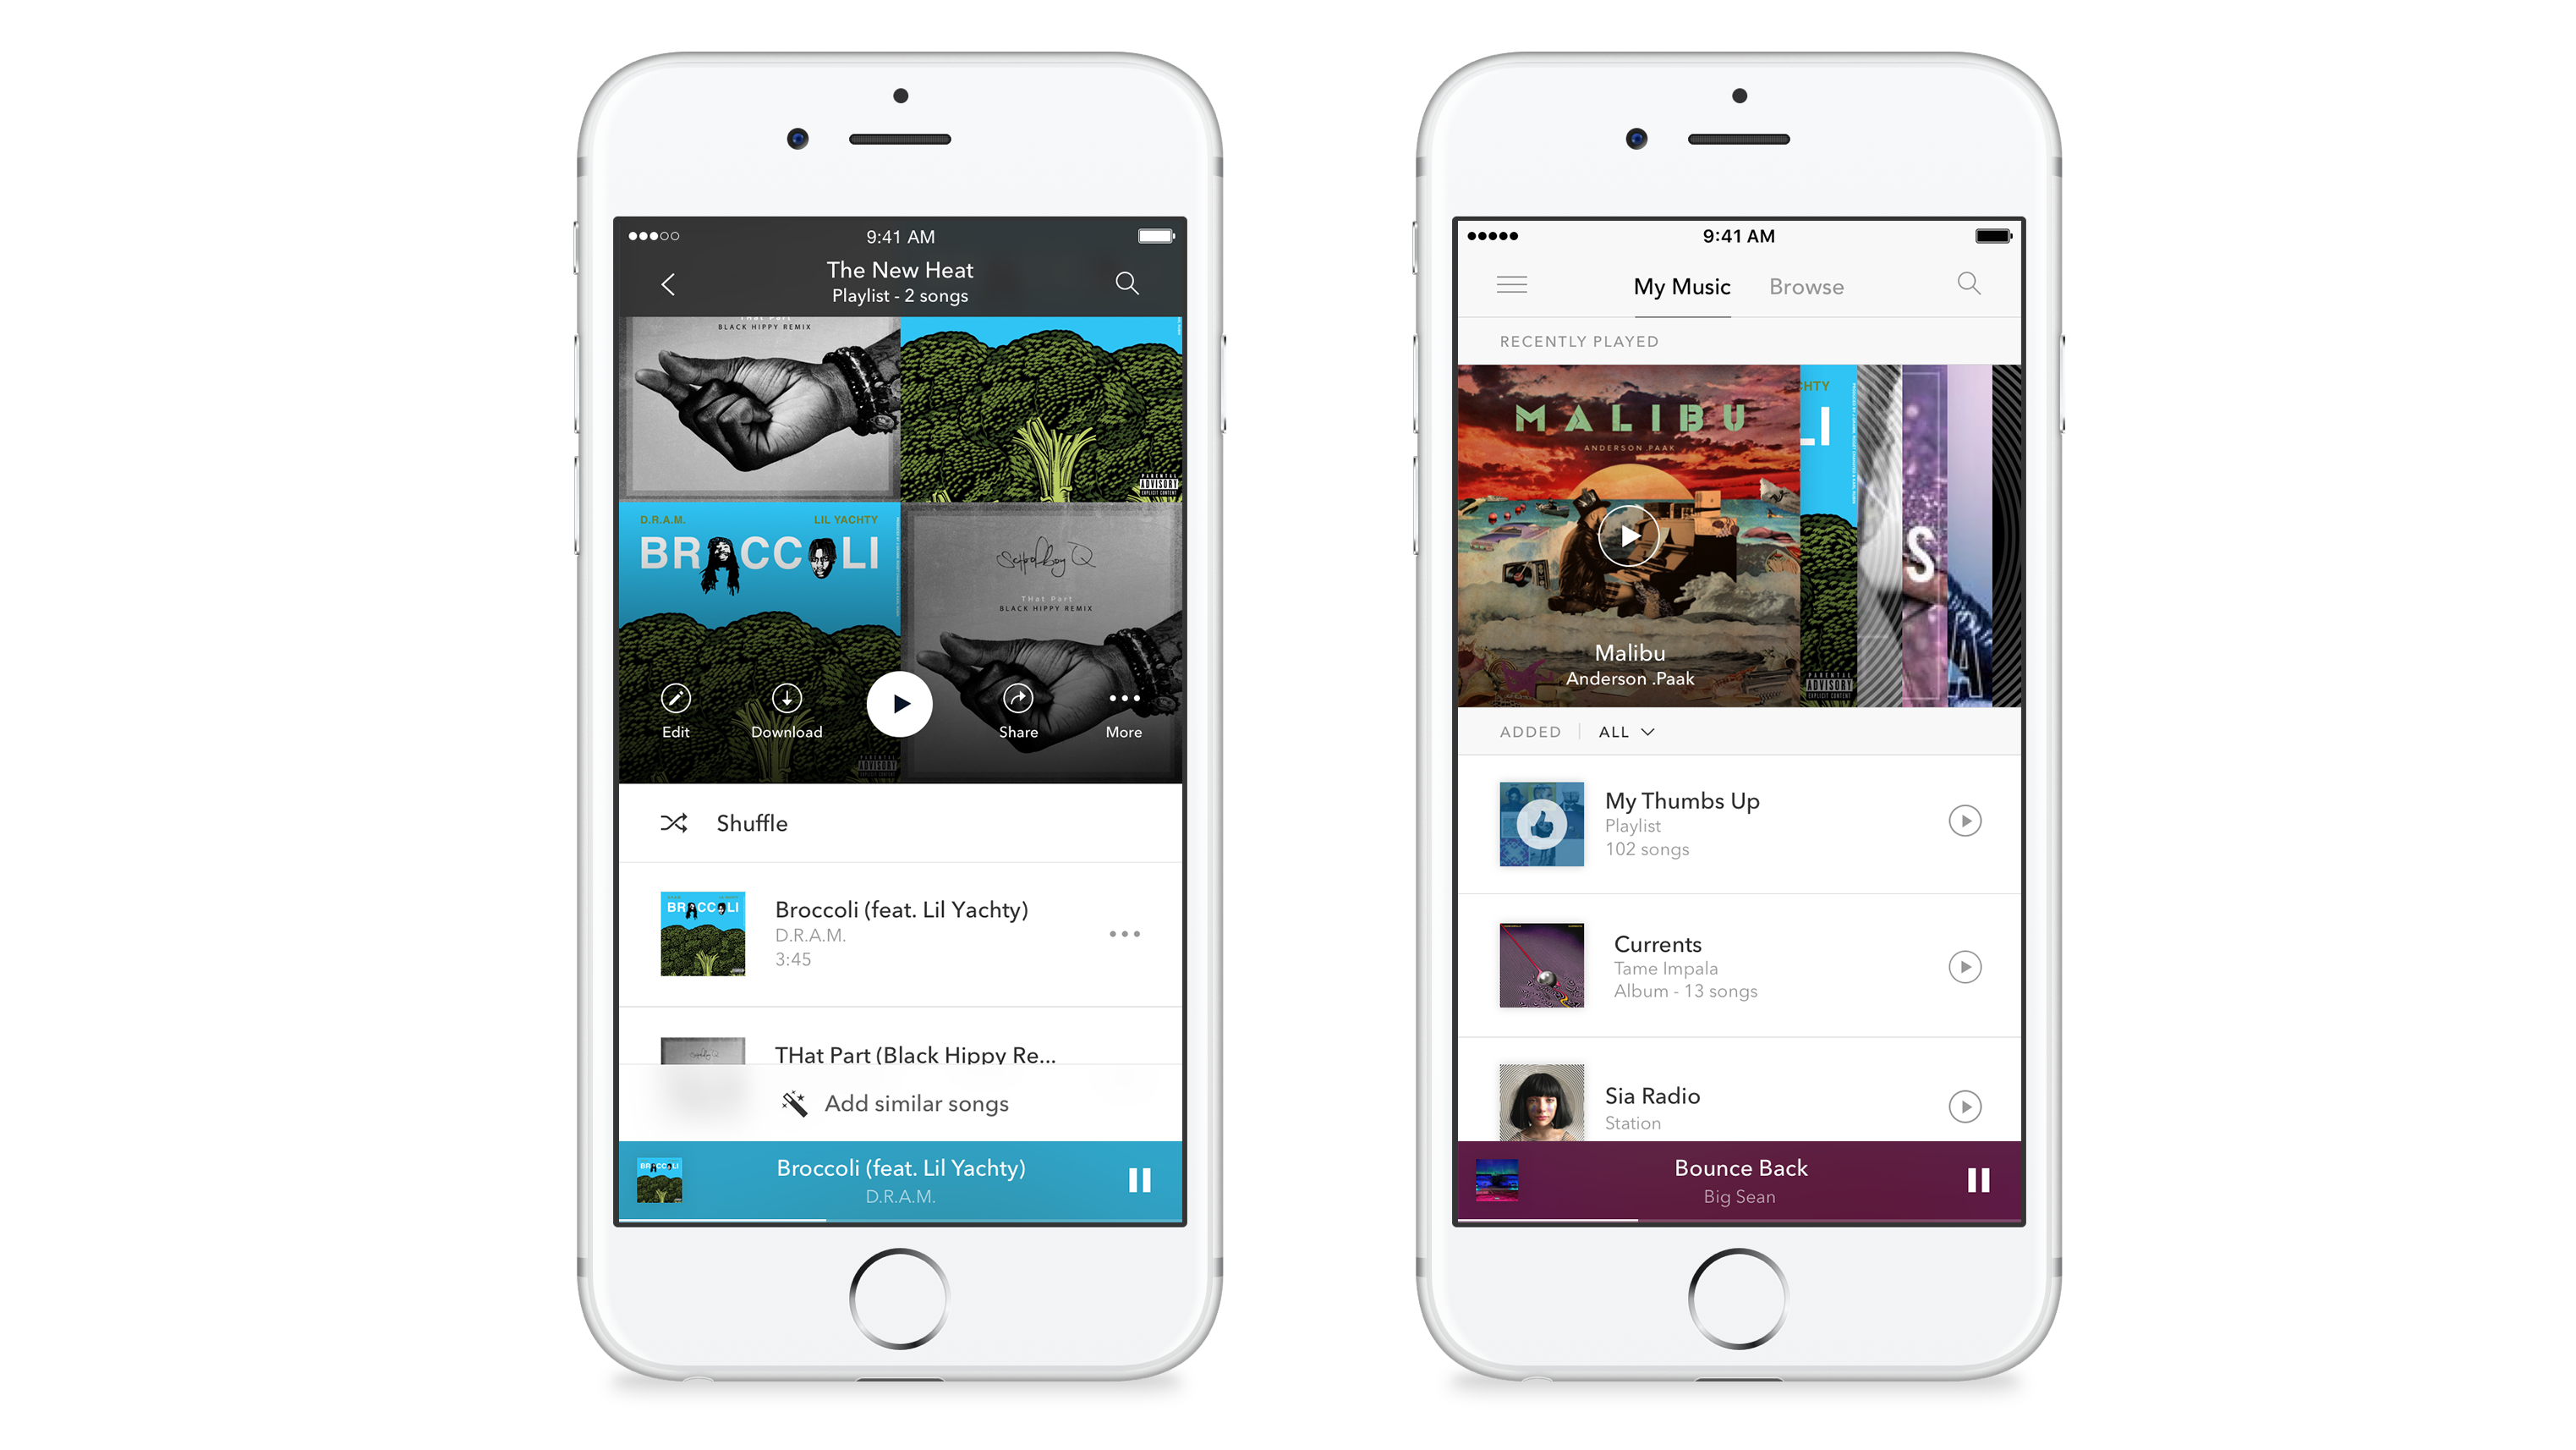 Pandora Premium has officially launched, but is it enough to take on Spotify and others?